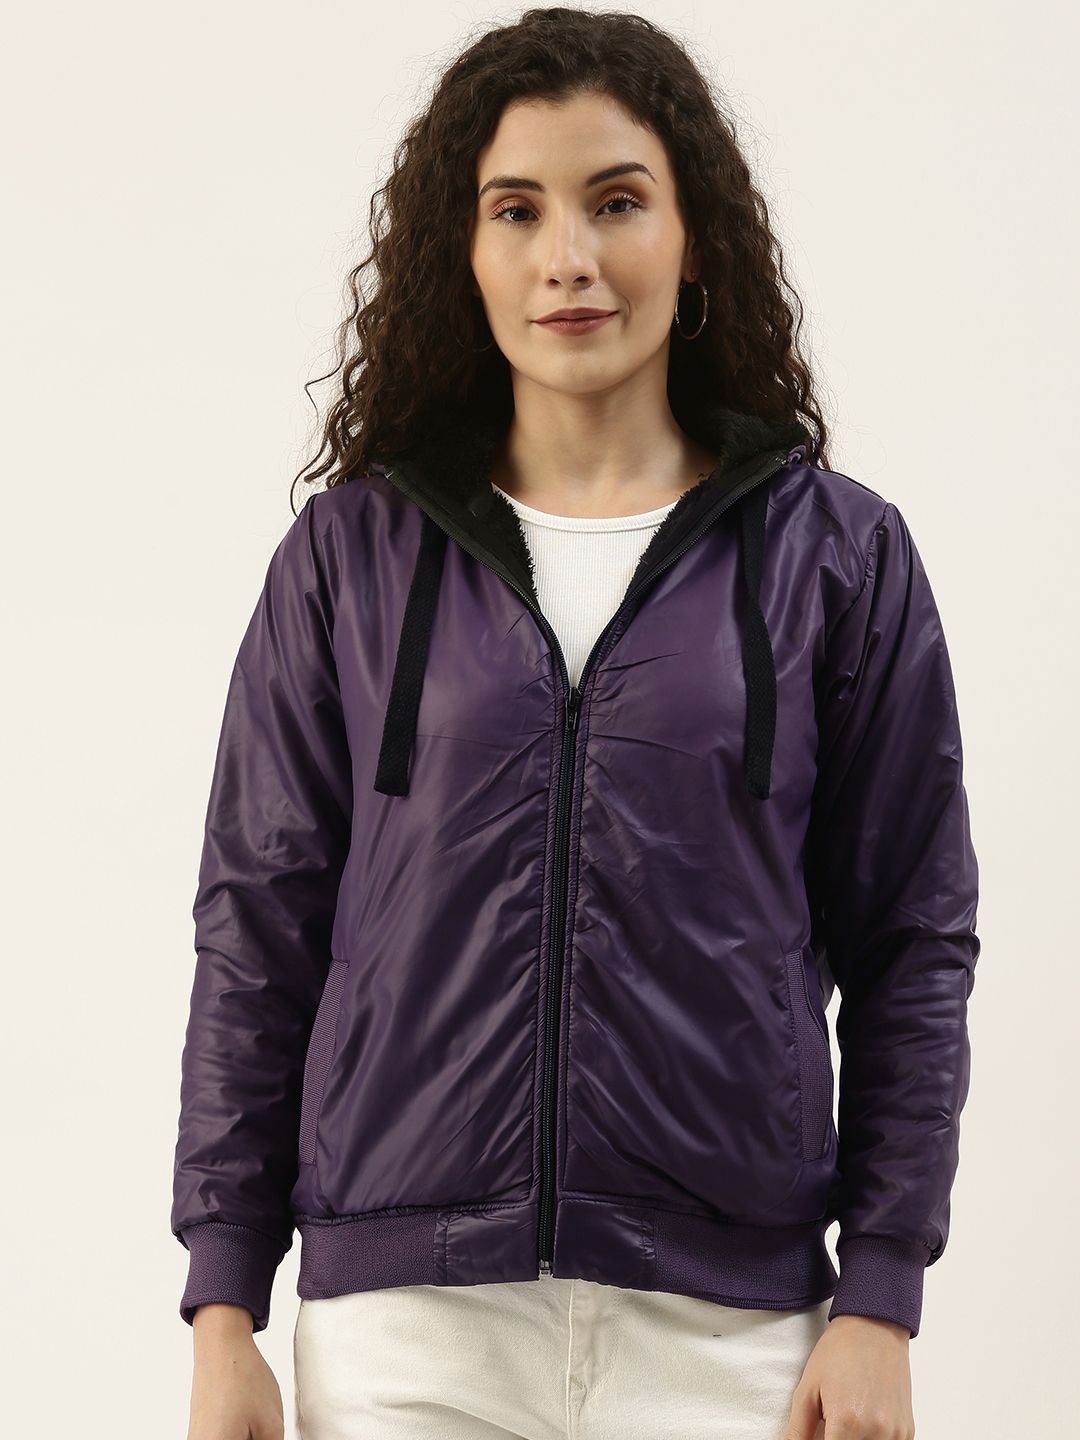 Campus Sutra Women Purple Solid Hooded Bomber Jacket Price in India